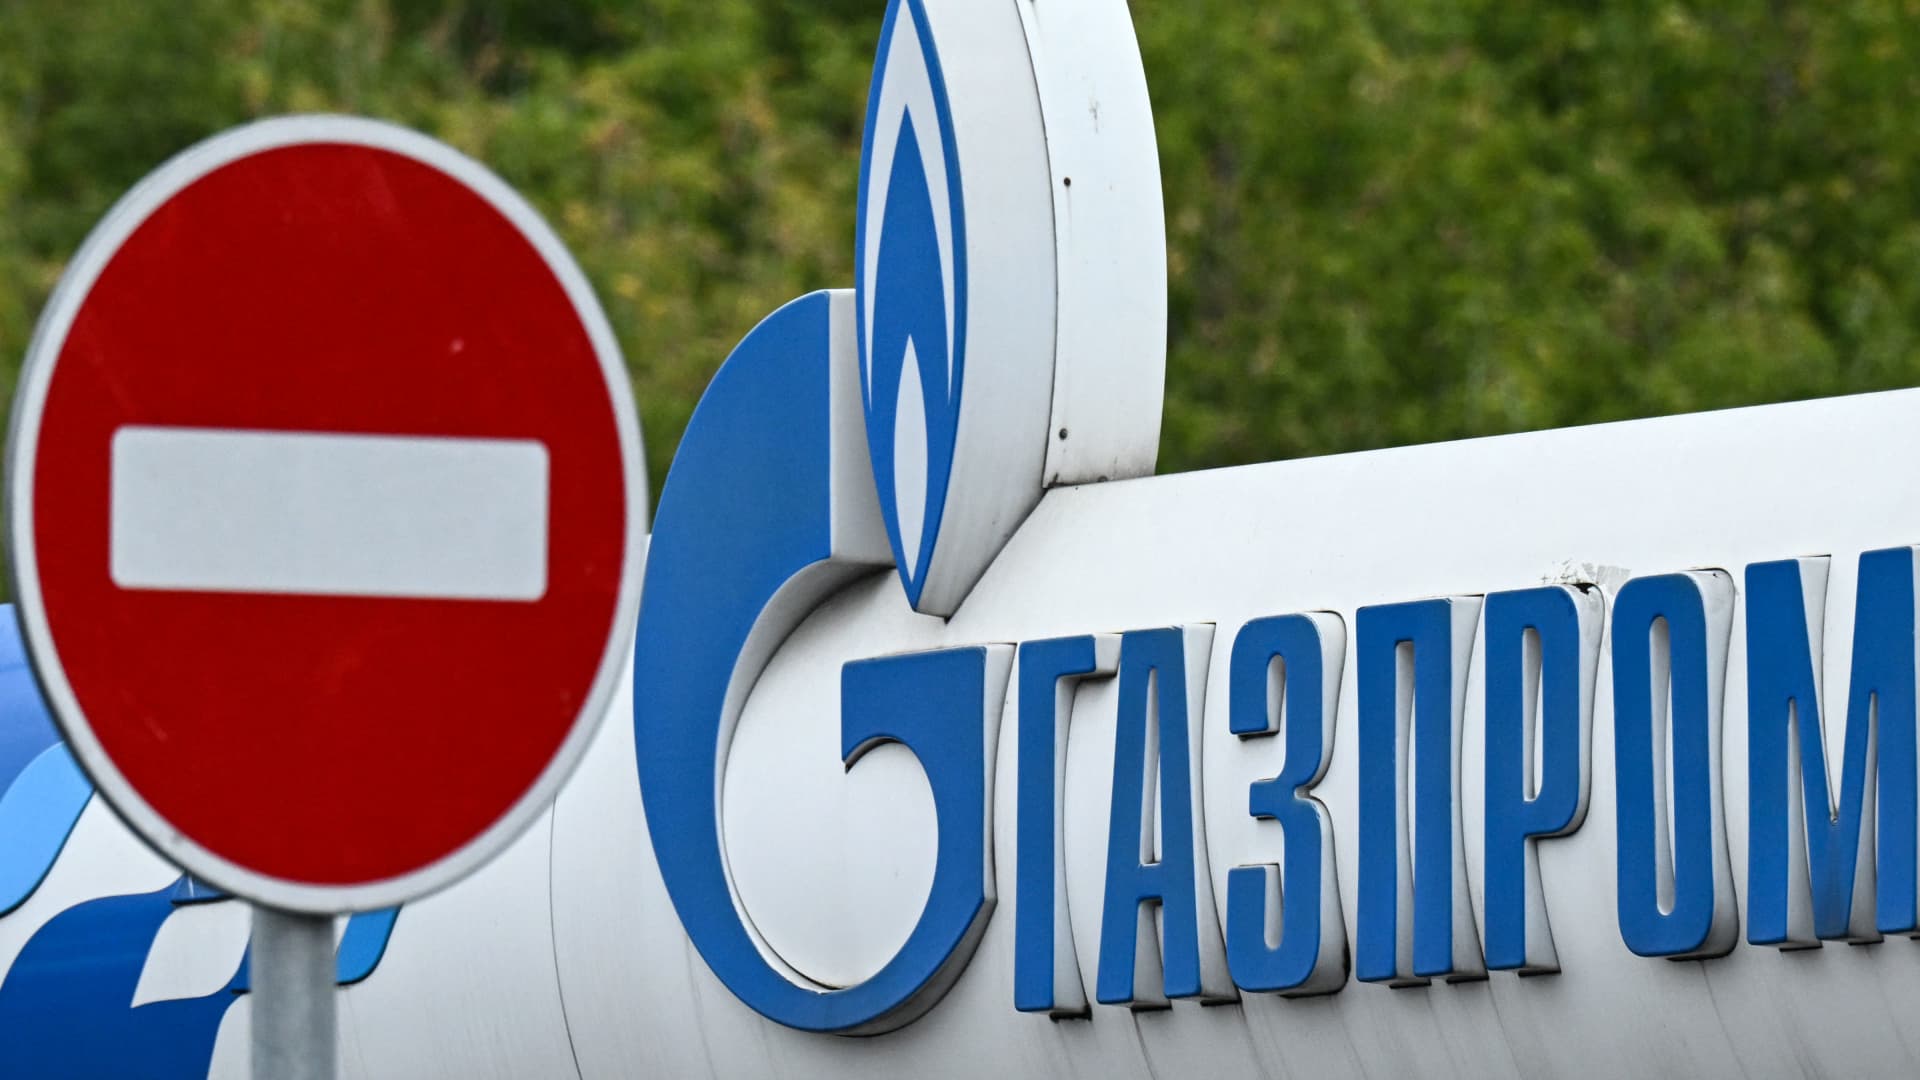 Last week, Gazprom accused Ukraine of withholding gas supplies destined for Moldova and threatened to reduce those flows, although Ukraine denied the accusation.